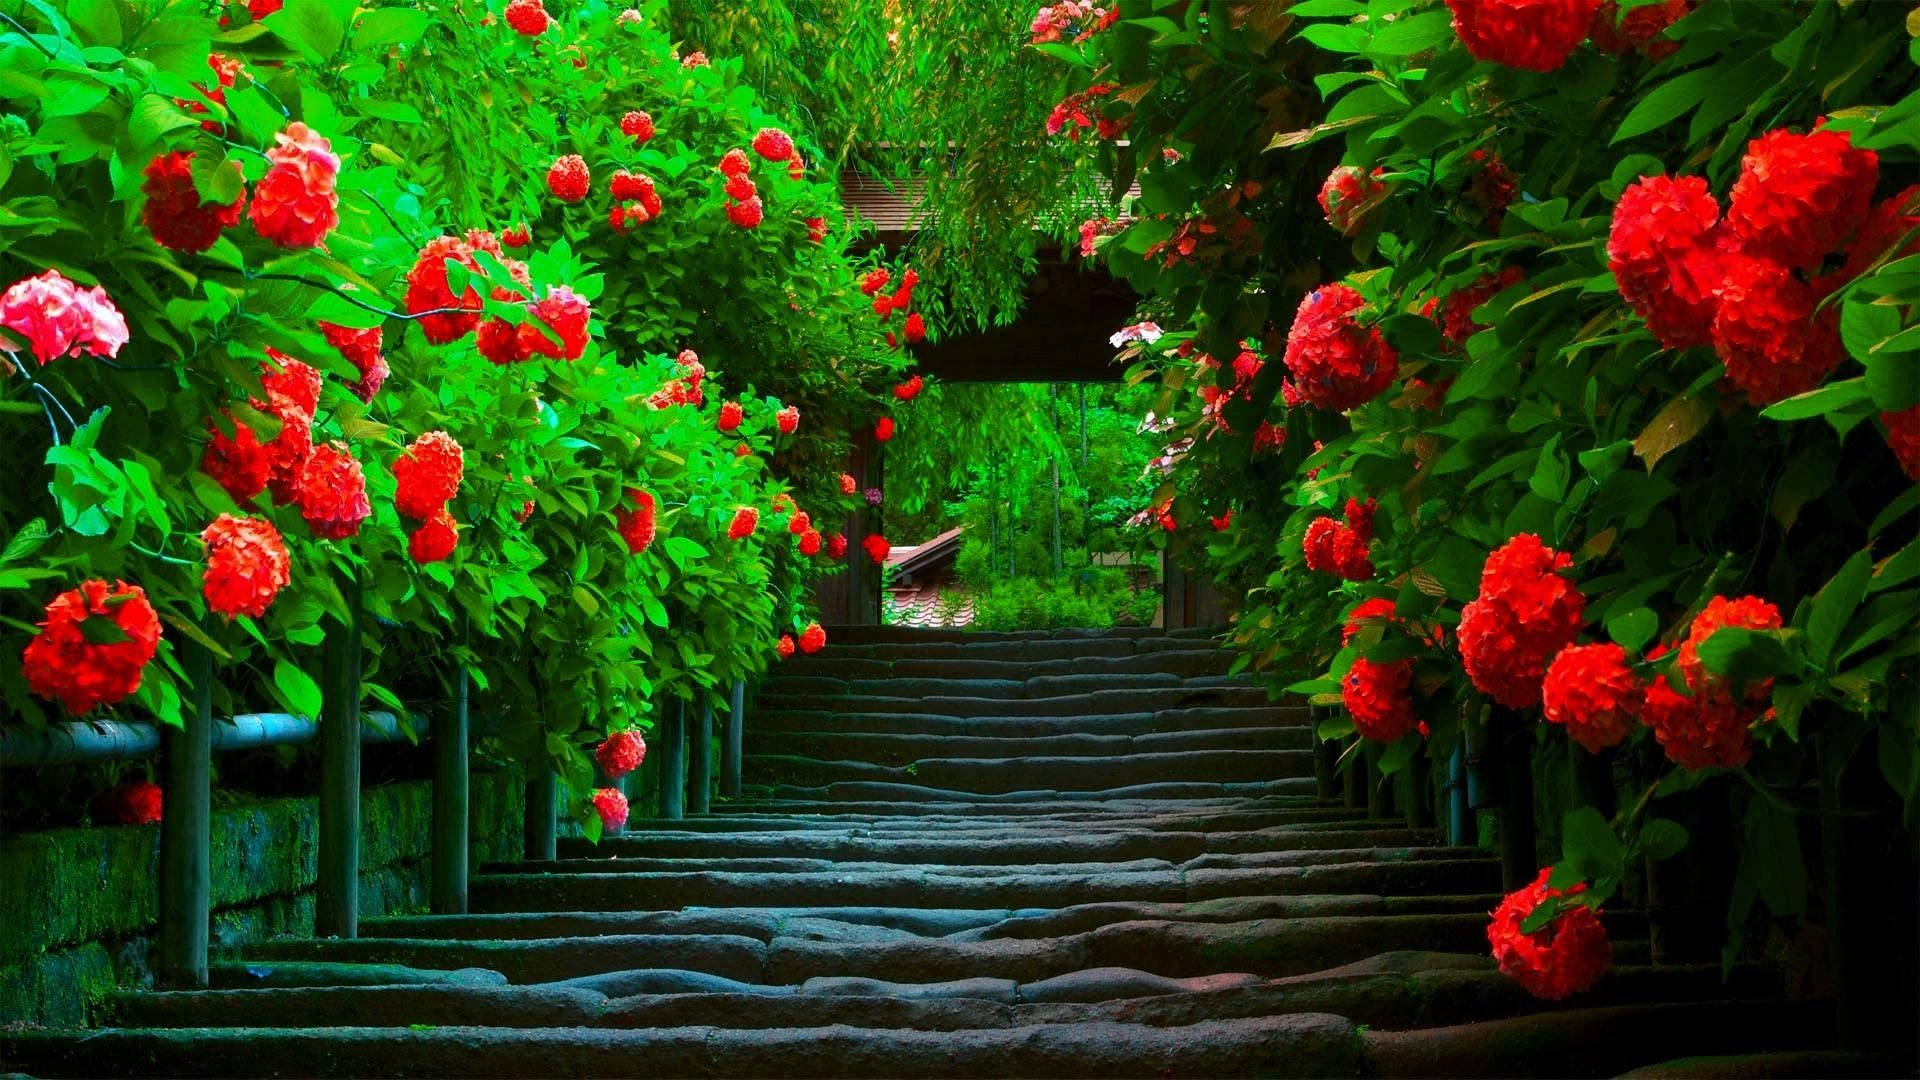 Feel the beauty of nature as flowers blossom in a charming garden. Wallpaper